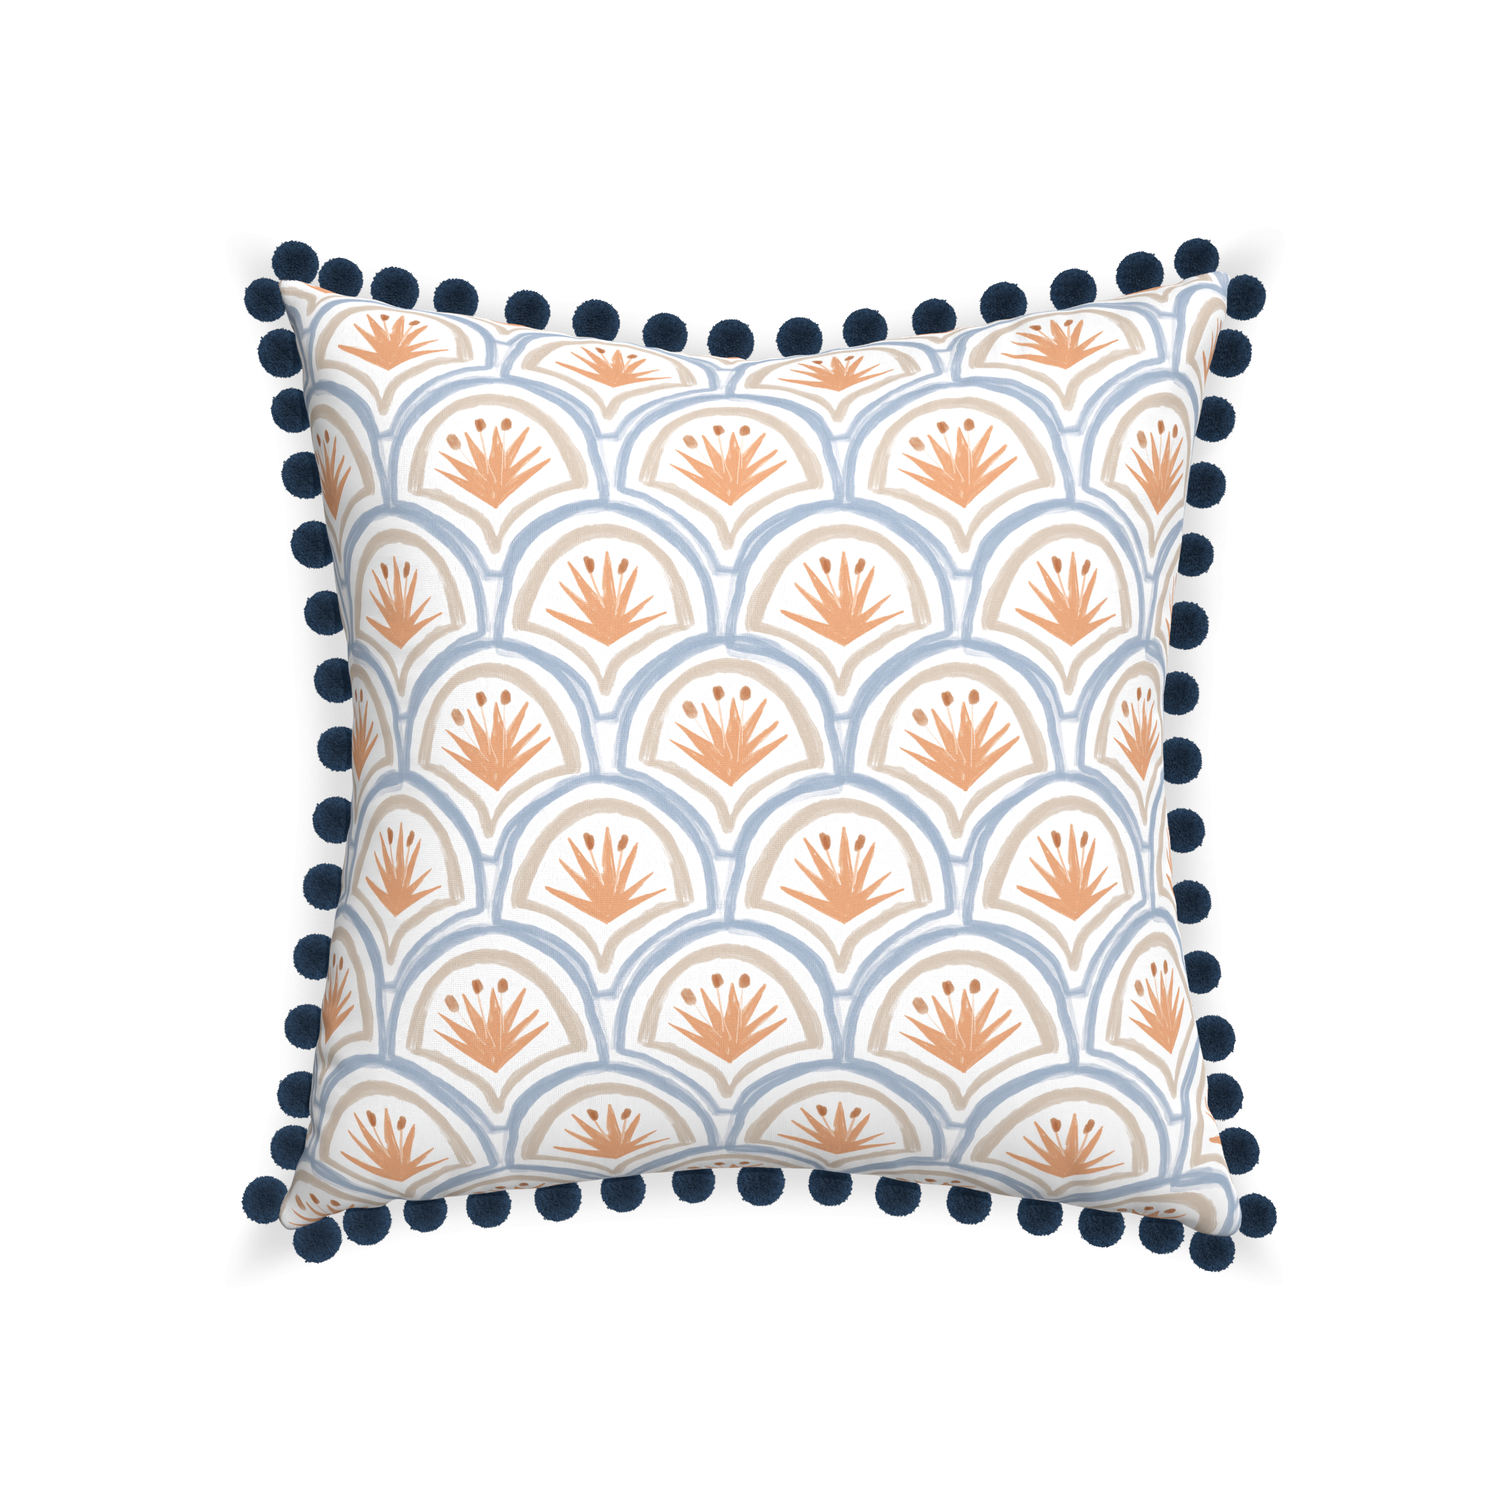 22-square thatcher apricot custom art deco palm patternpillow with c on white background